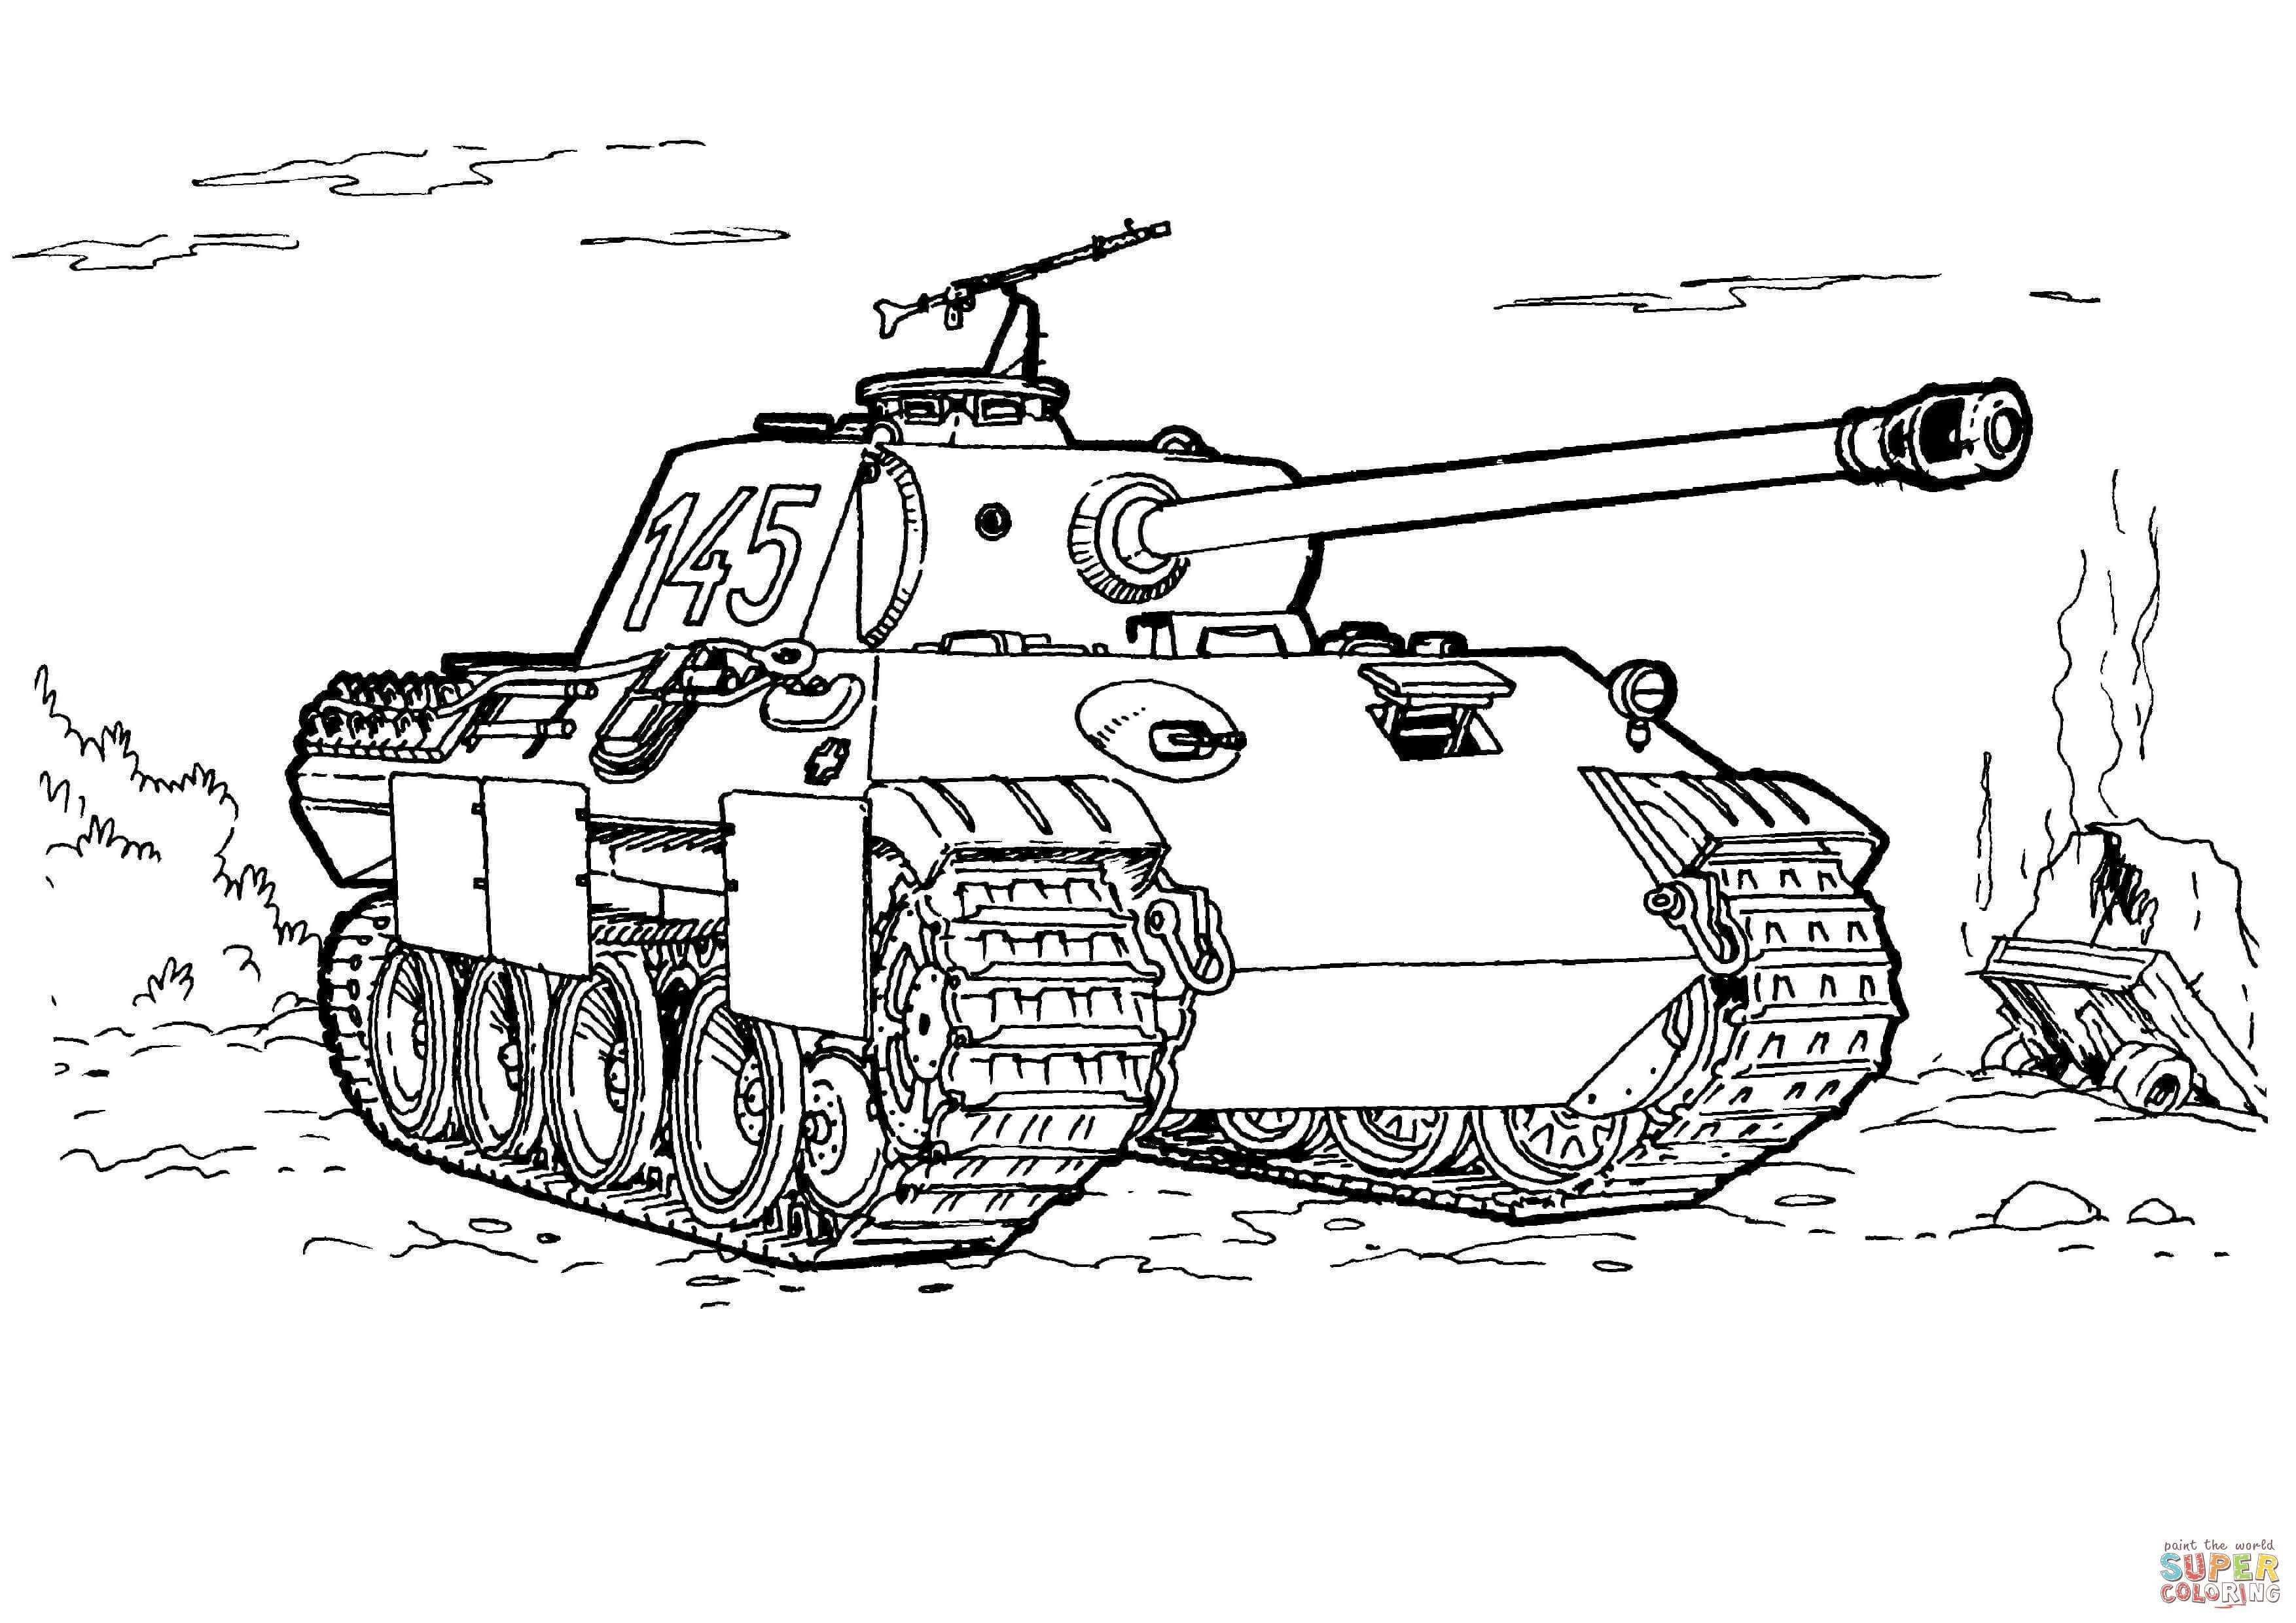 Panther Tank Coloring Page From Tanks Category Select From 27252 Printable Crafts Of Cartoons Nature Animals Tank Drawing Coloring Book Art Coloring Pages